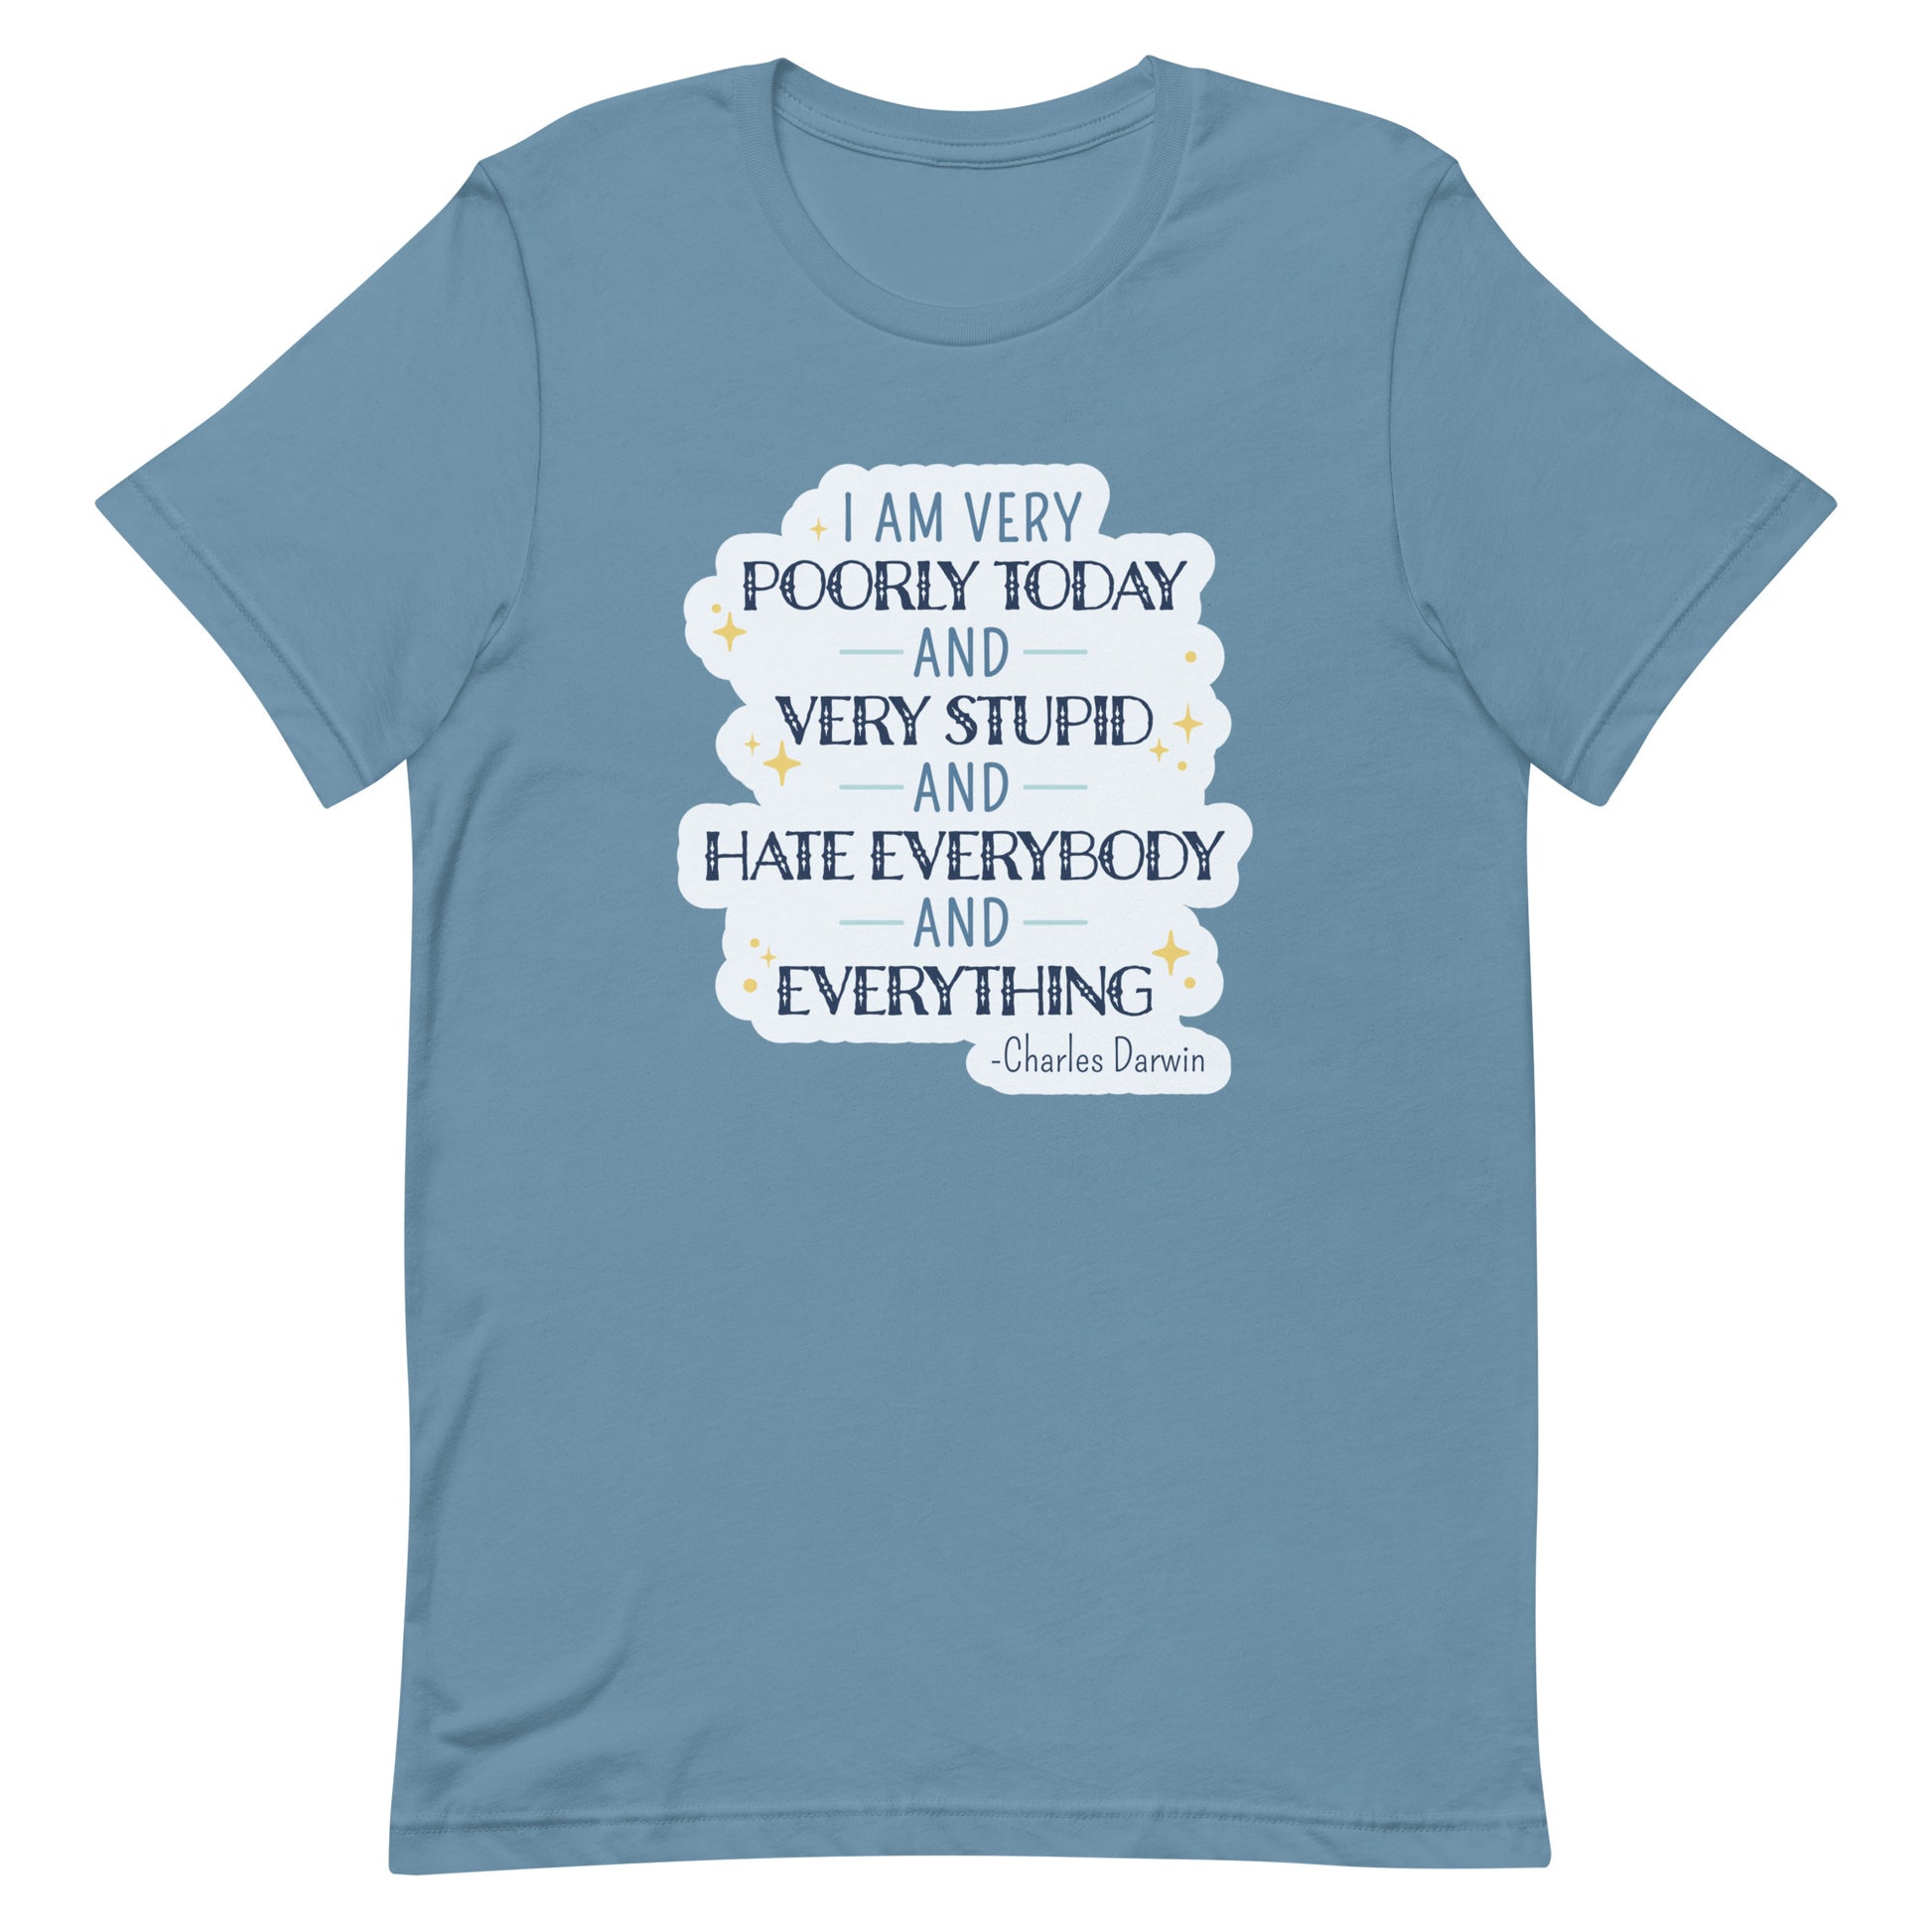 A light blue crewneck t-shirt featuring a quote from Charles Darwin in blue text. The quote reads "I am very poorly today and very stupid and hate everybody and everything".